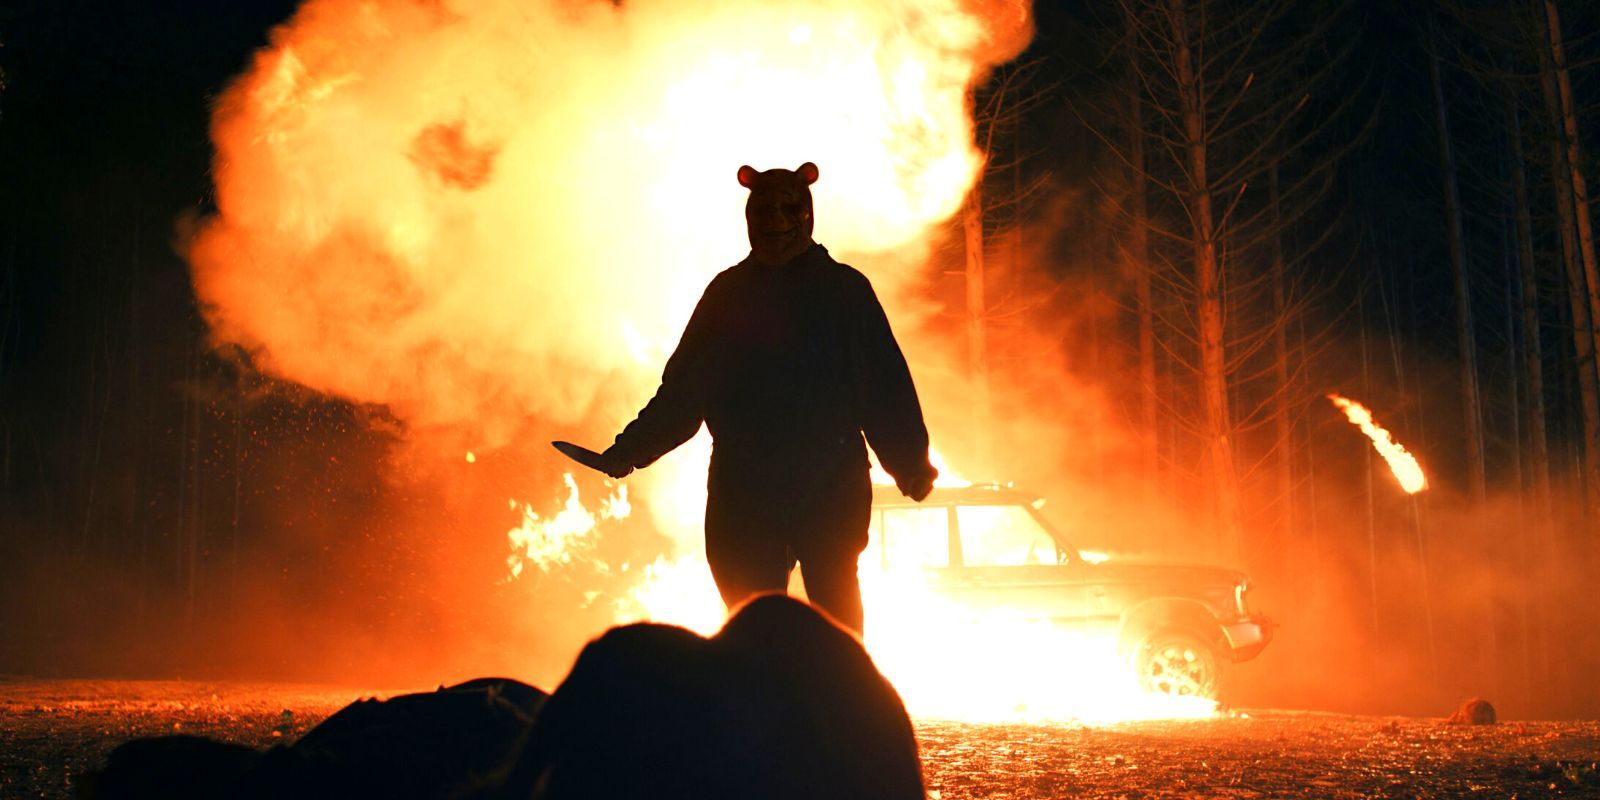 Winnie-The-Pooh posing with a knife in front of a burning car